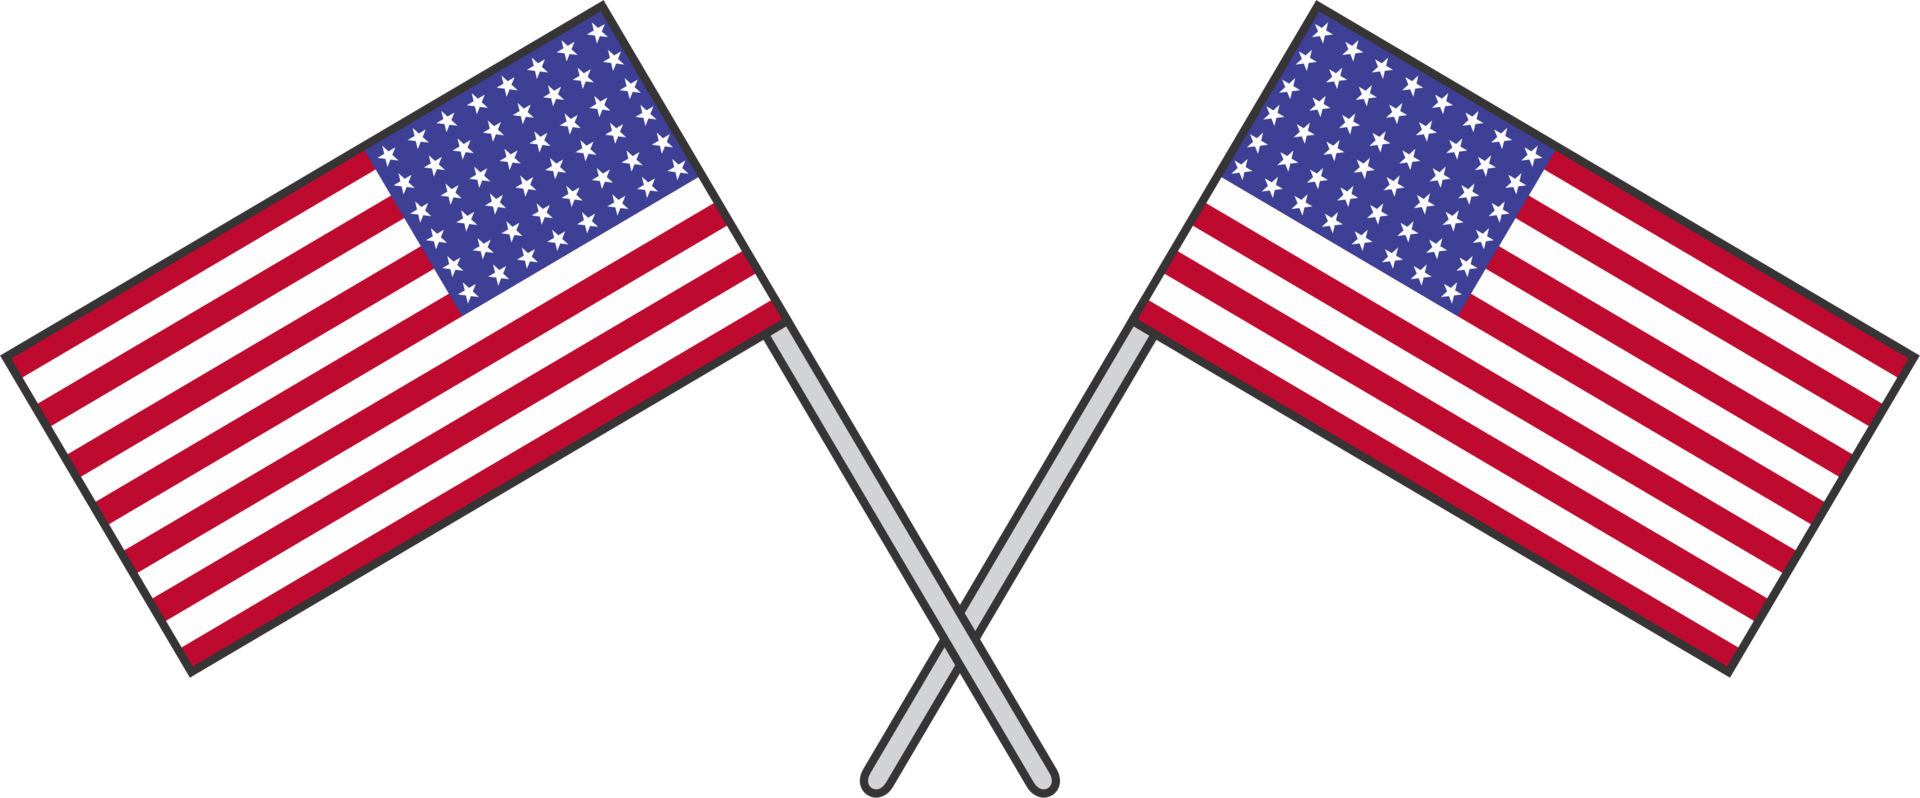 American flag icon PNG